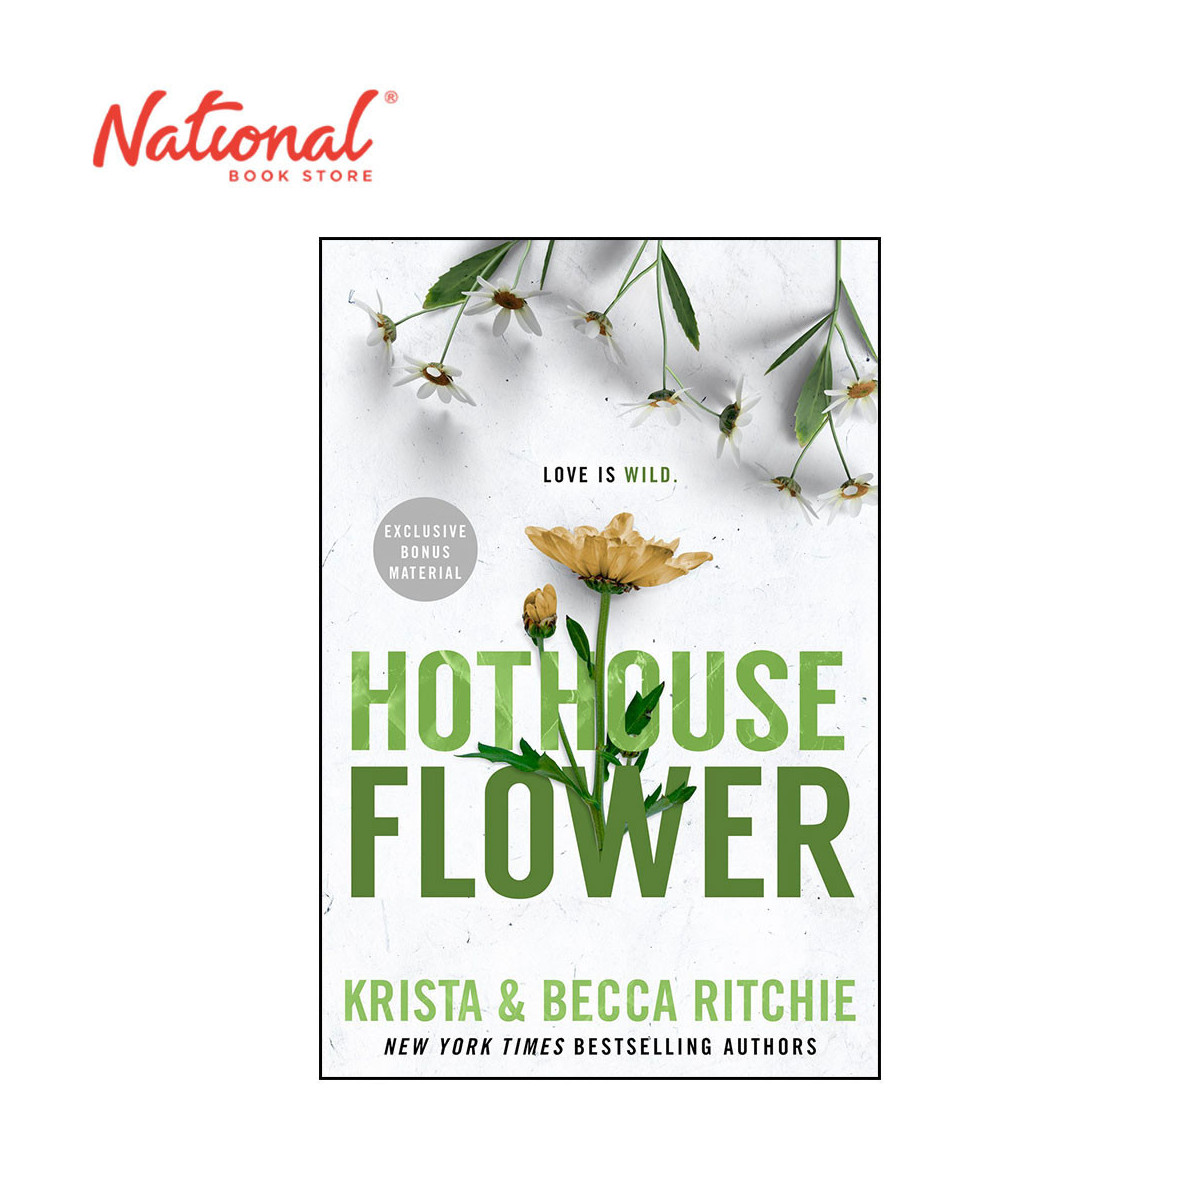 Addicted 5: Hothouse Flower by Krista Ritchie and Becca Ritchie - New Adult Fiction